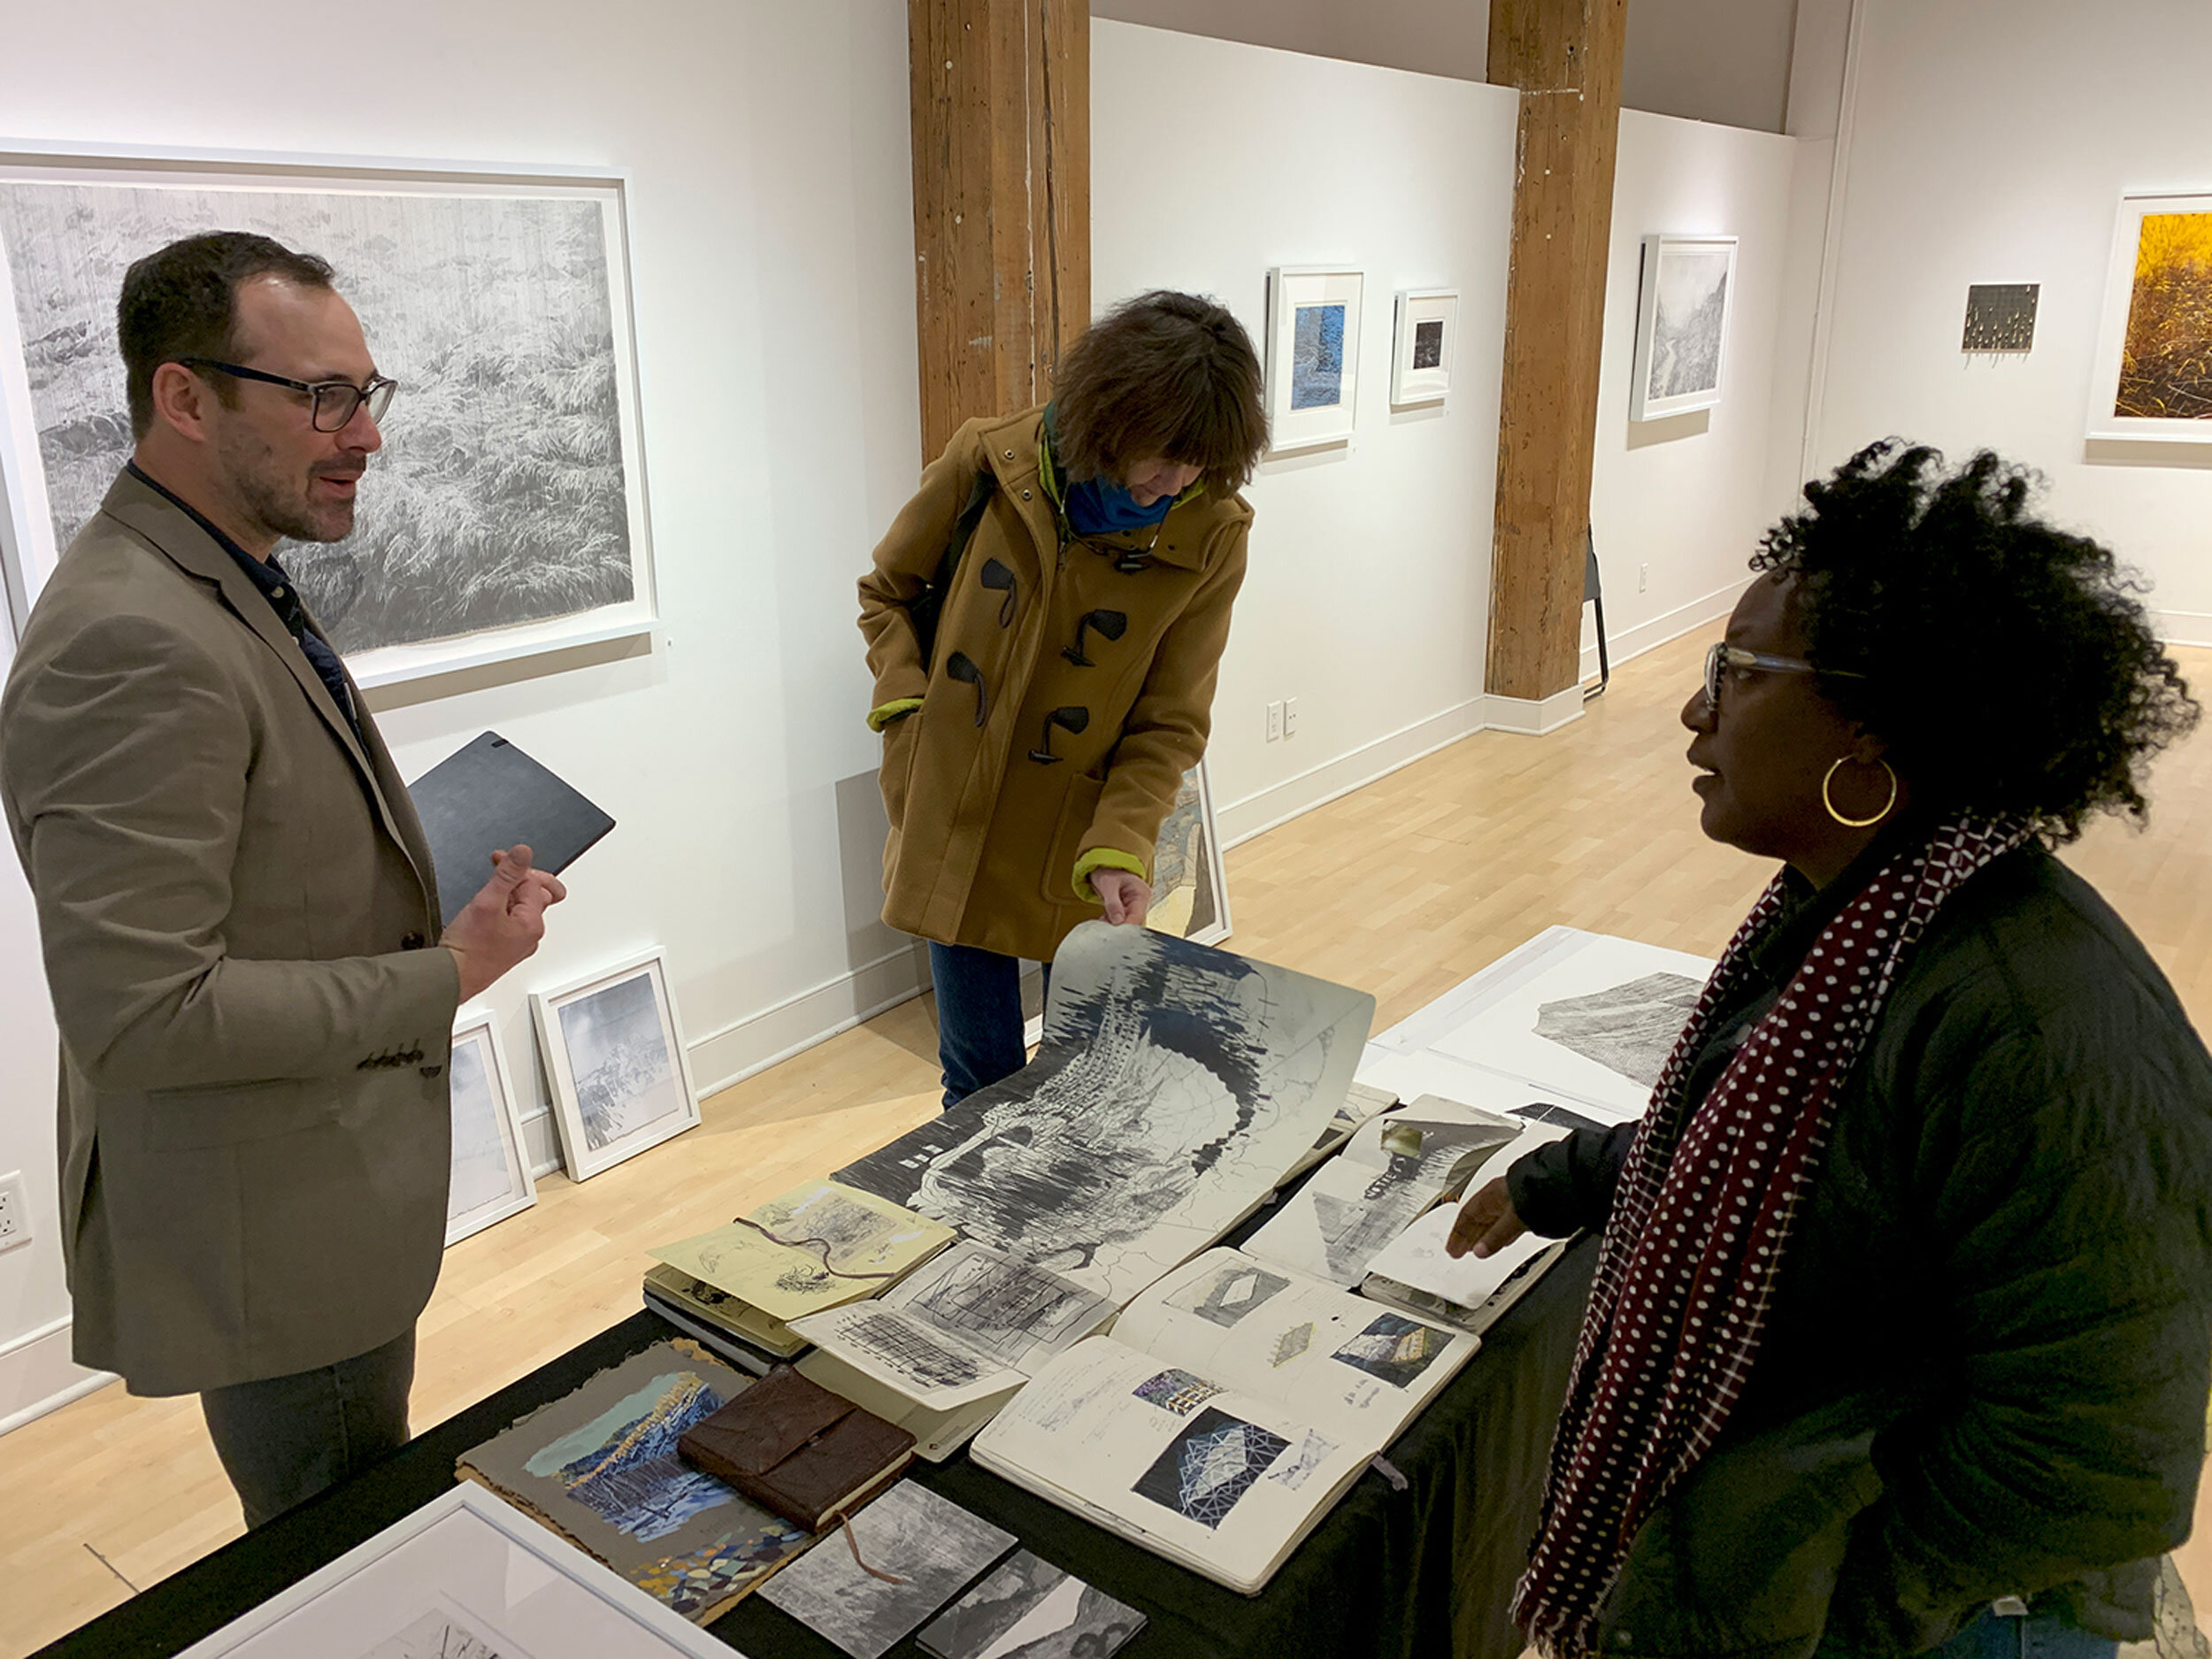  Mike Marks (left), with Michelle Grabner (center) and Delita Martin at an exhibition of Mike’s work 